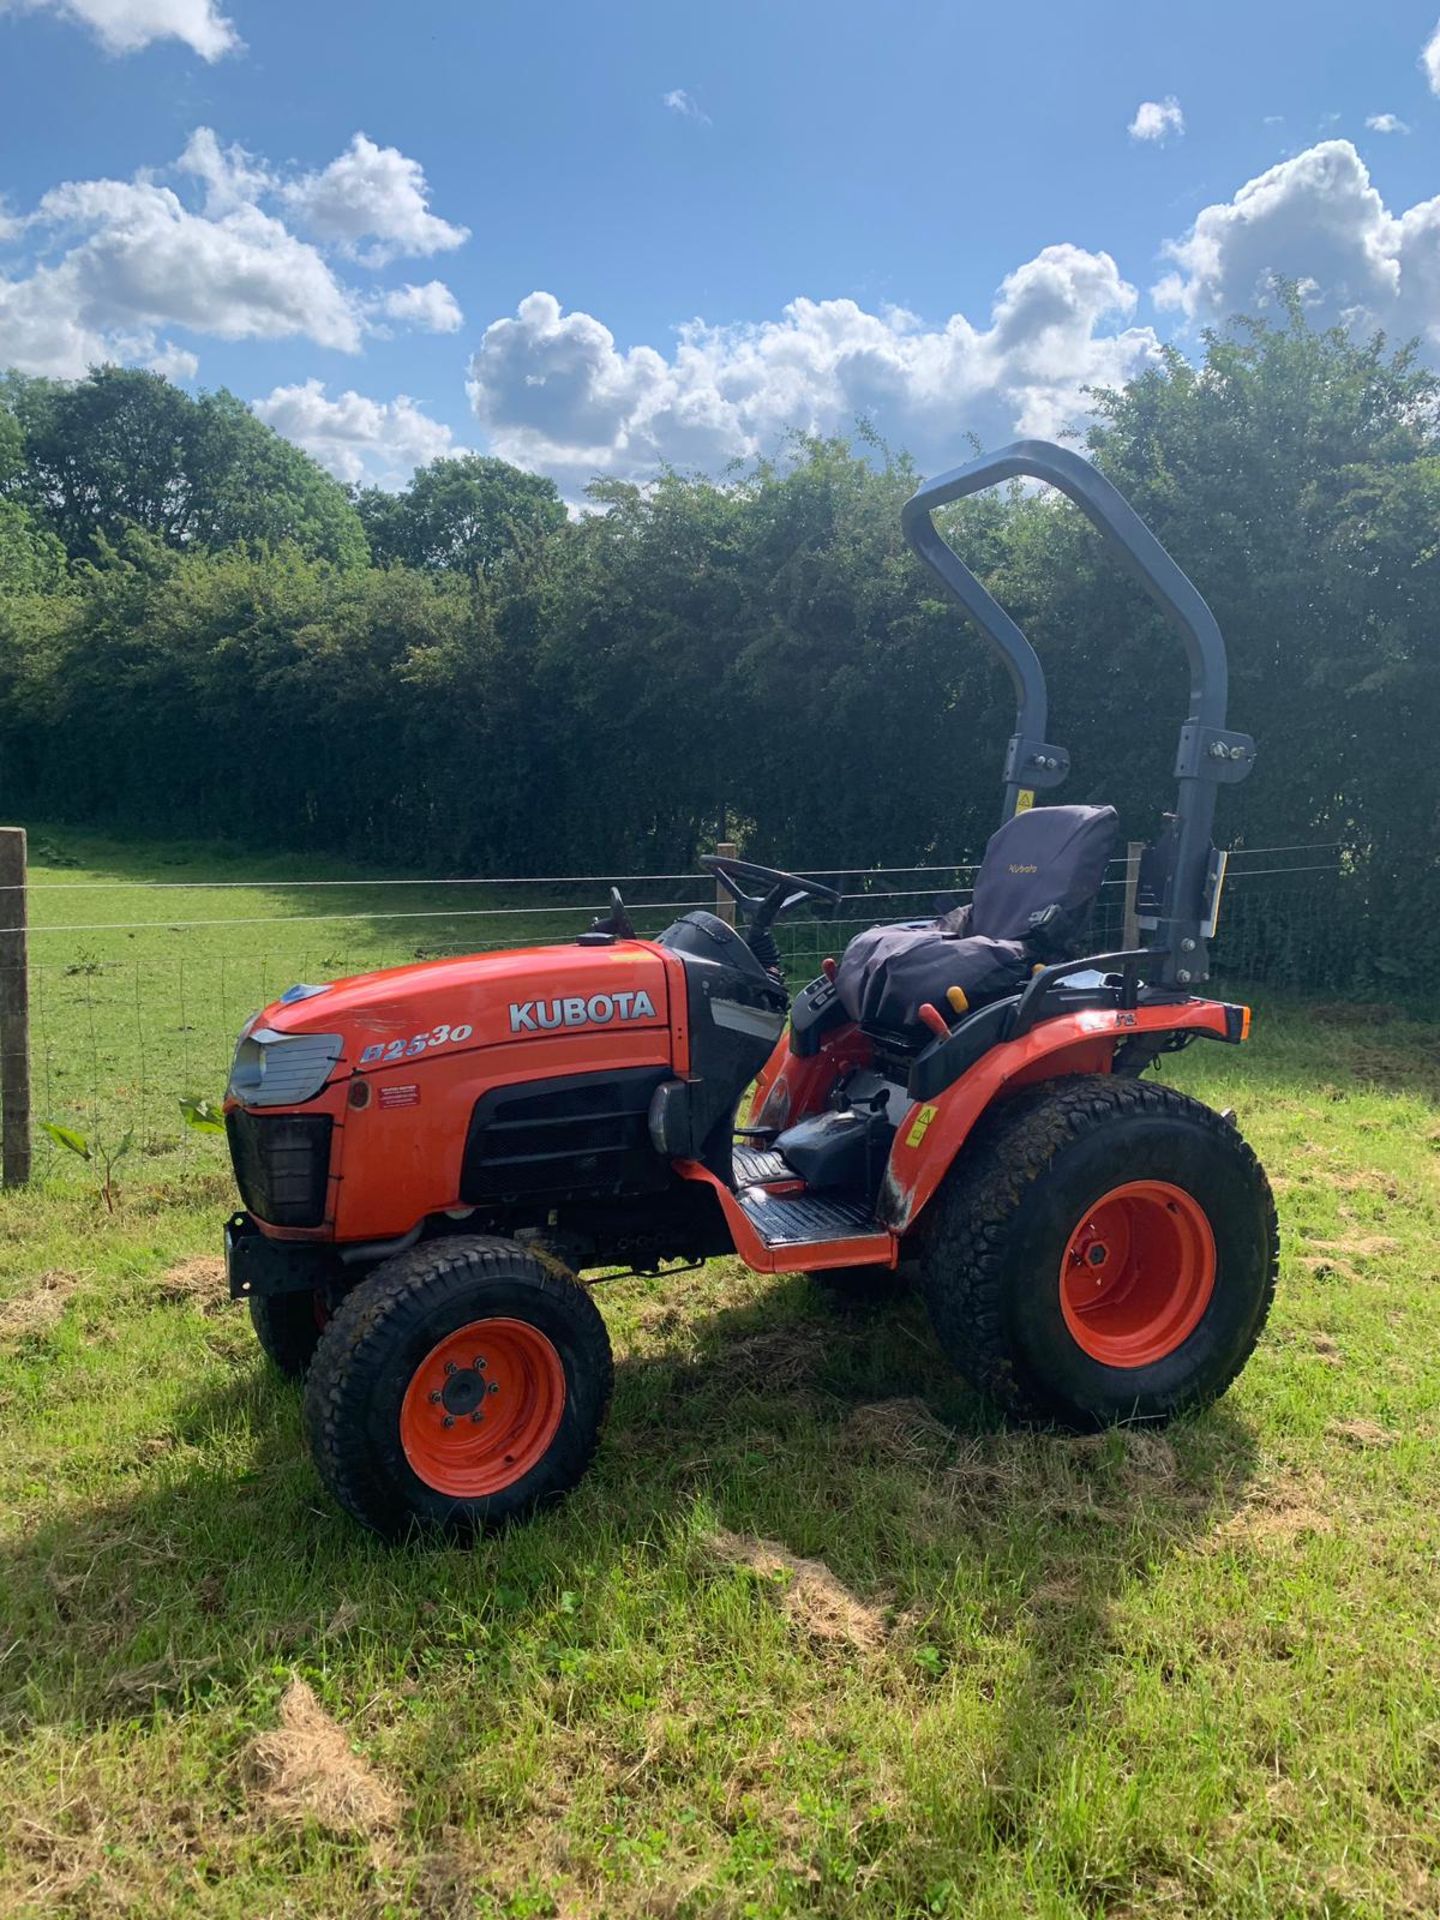 2017/17 REG KUBOTA B2530 COMPACT TRACTOR, RUNS AND WORKS, SHOWING 1989 HOURS *PLUS VAT* - Image 5 of 13